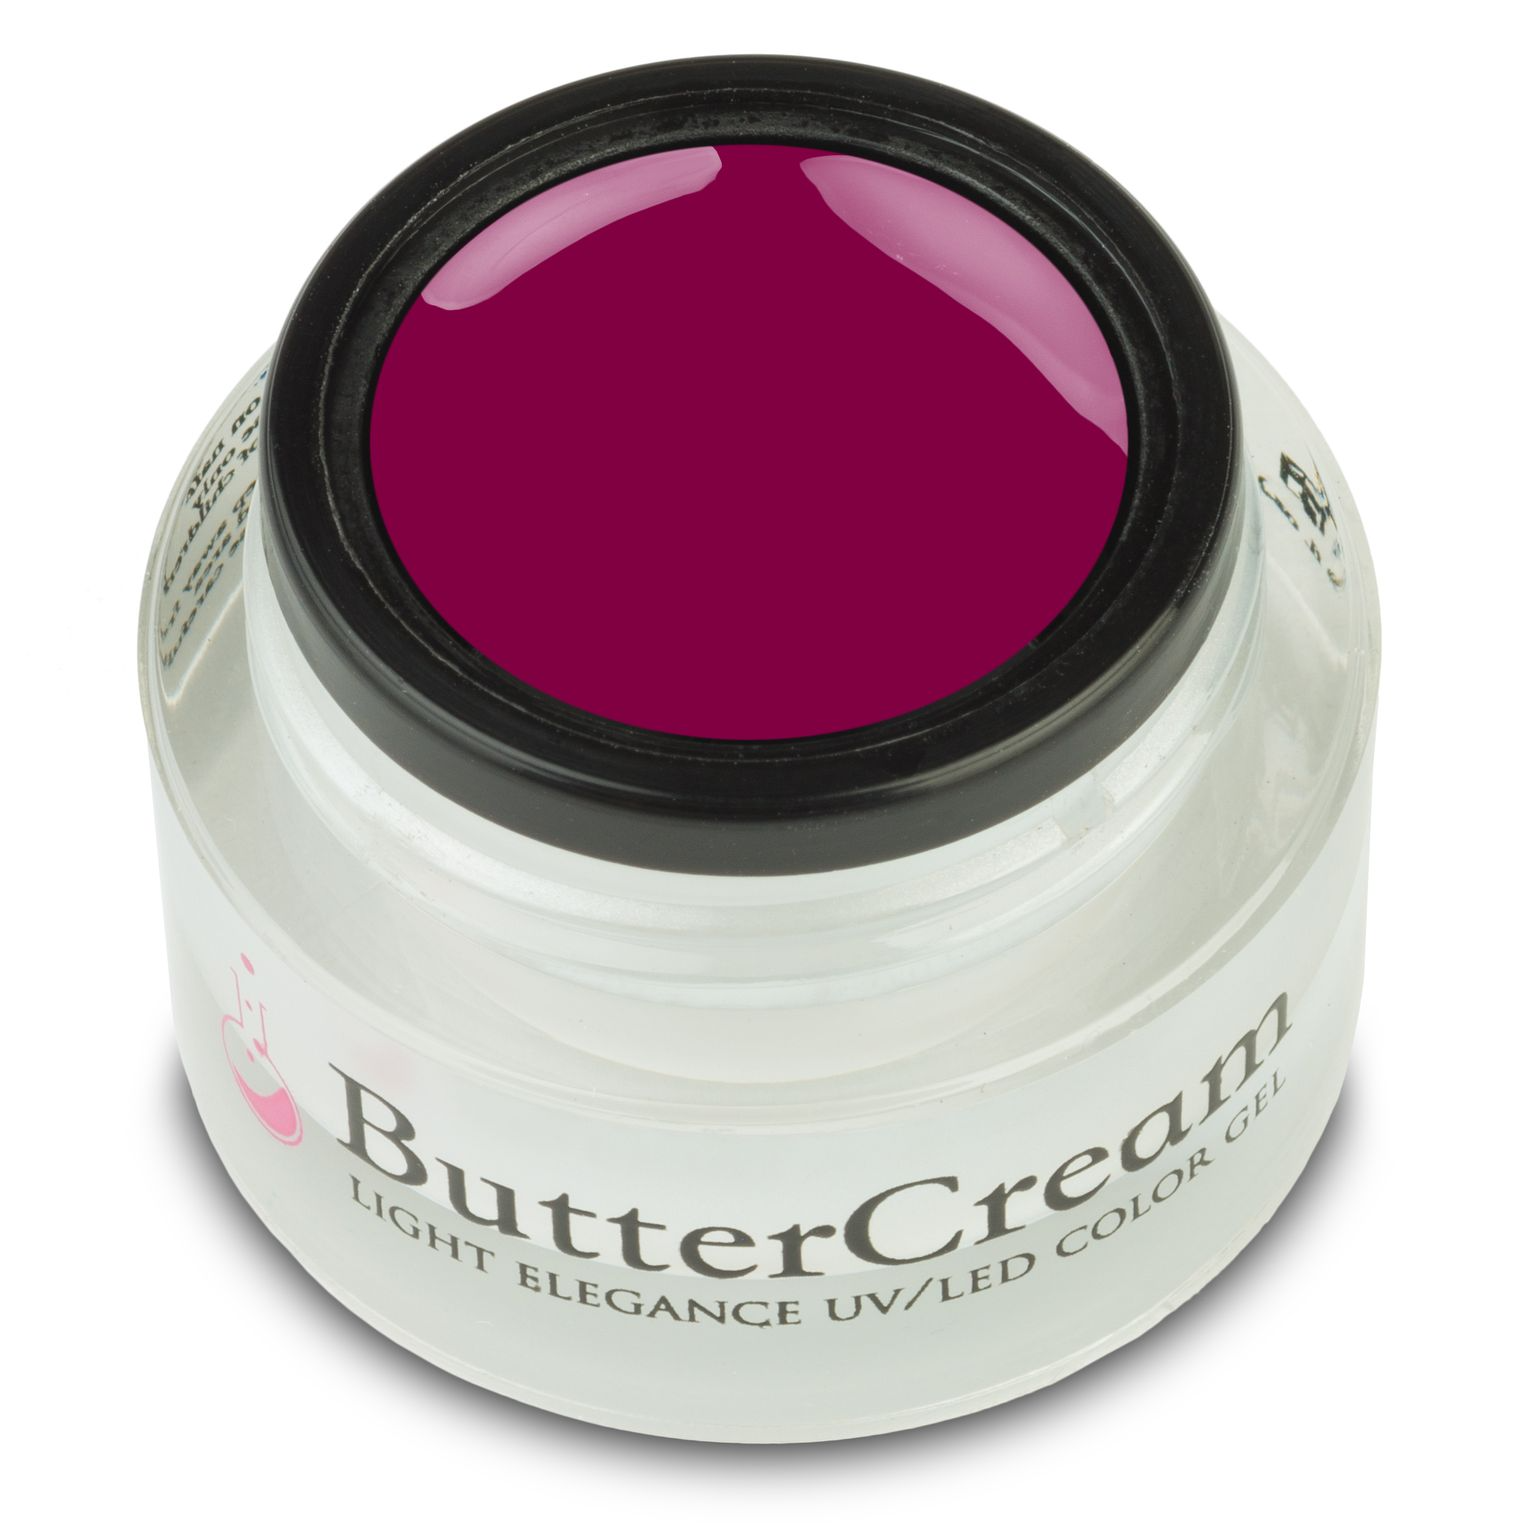 Light Elegance ButterCreams LED/UV - Positively Charged - Creata Beauty - Professional Beauty Products